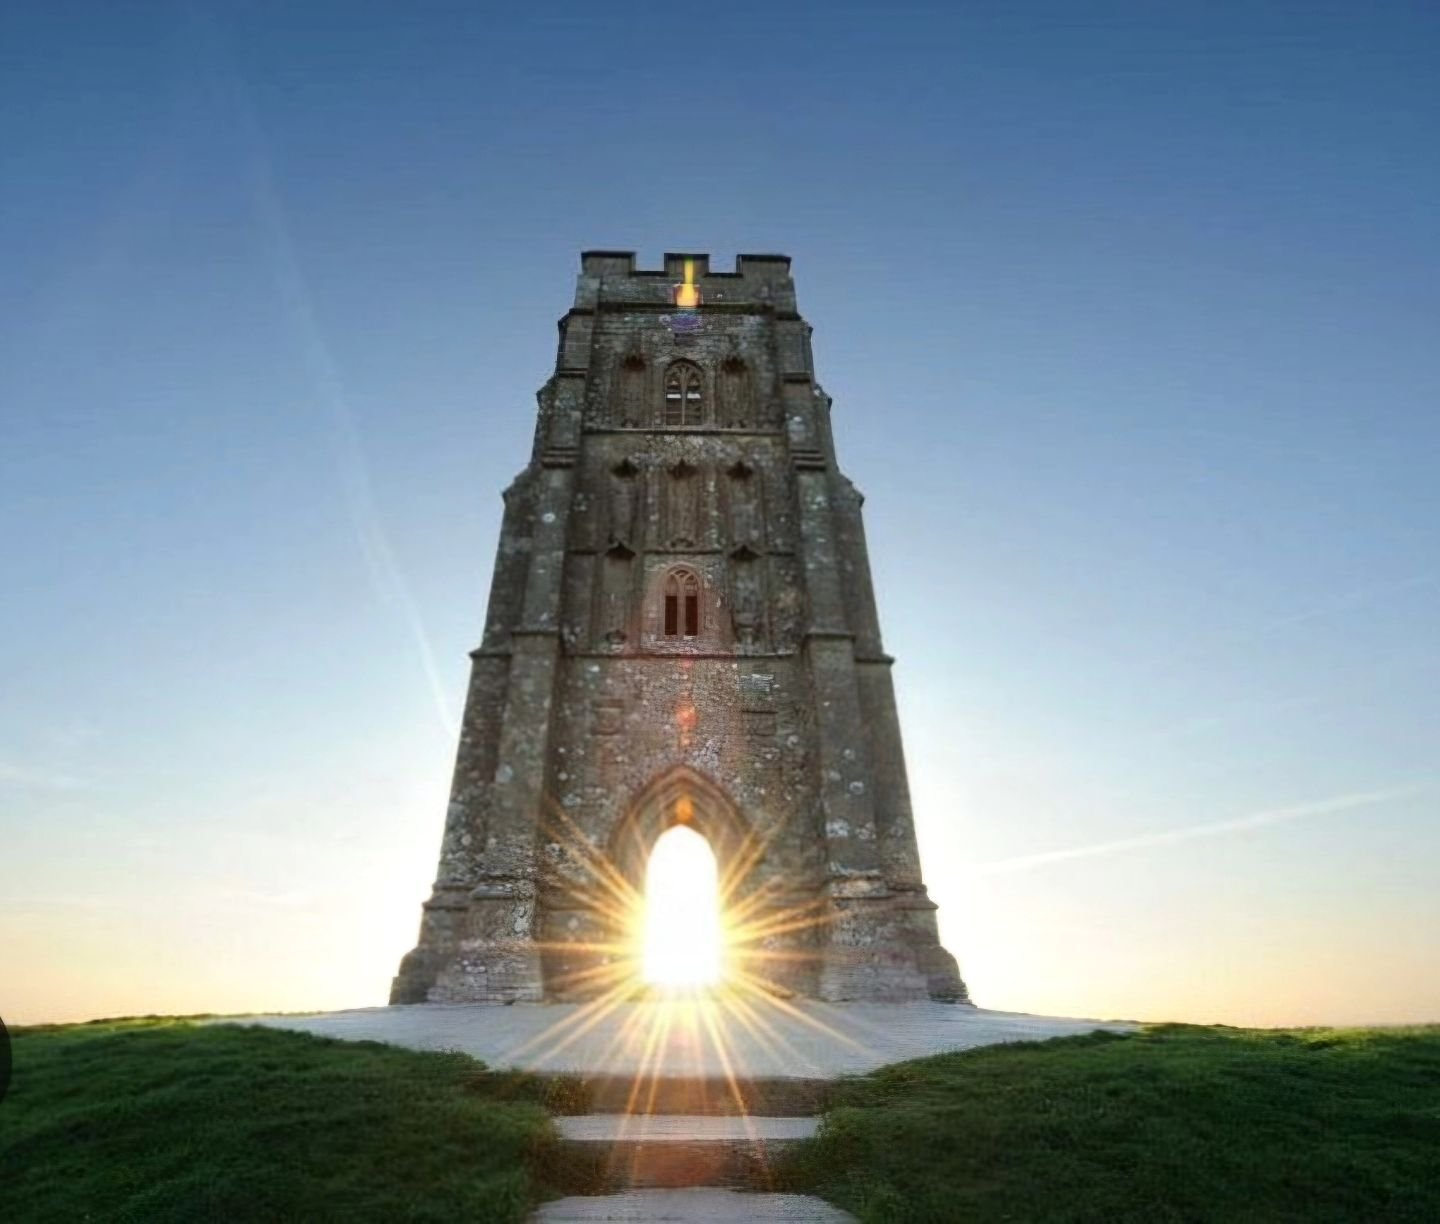 A message has come though about Glastonbury Tor, the gateway known to be used to access Avalon that is governed by Archangel Michael. It was where Jesus, the 12 disciples visited &amp; his uncle also once brought the holy grail to.

The Tor has been 